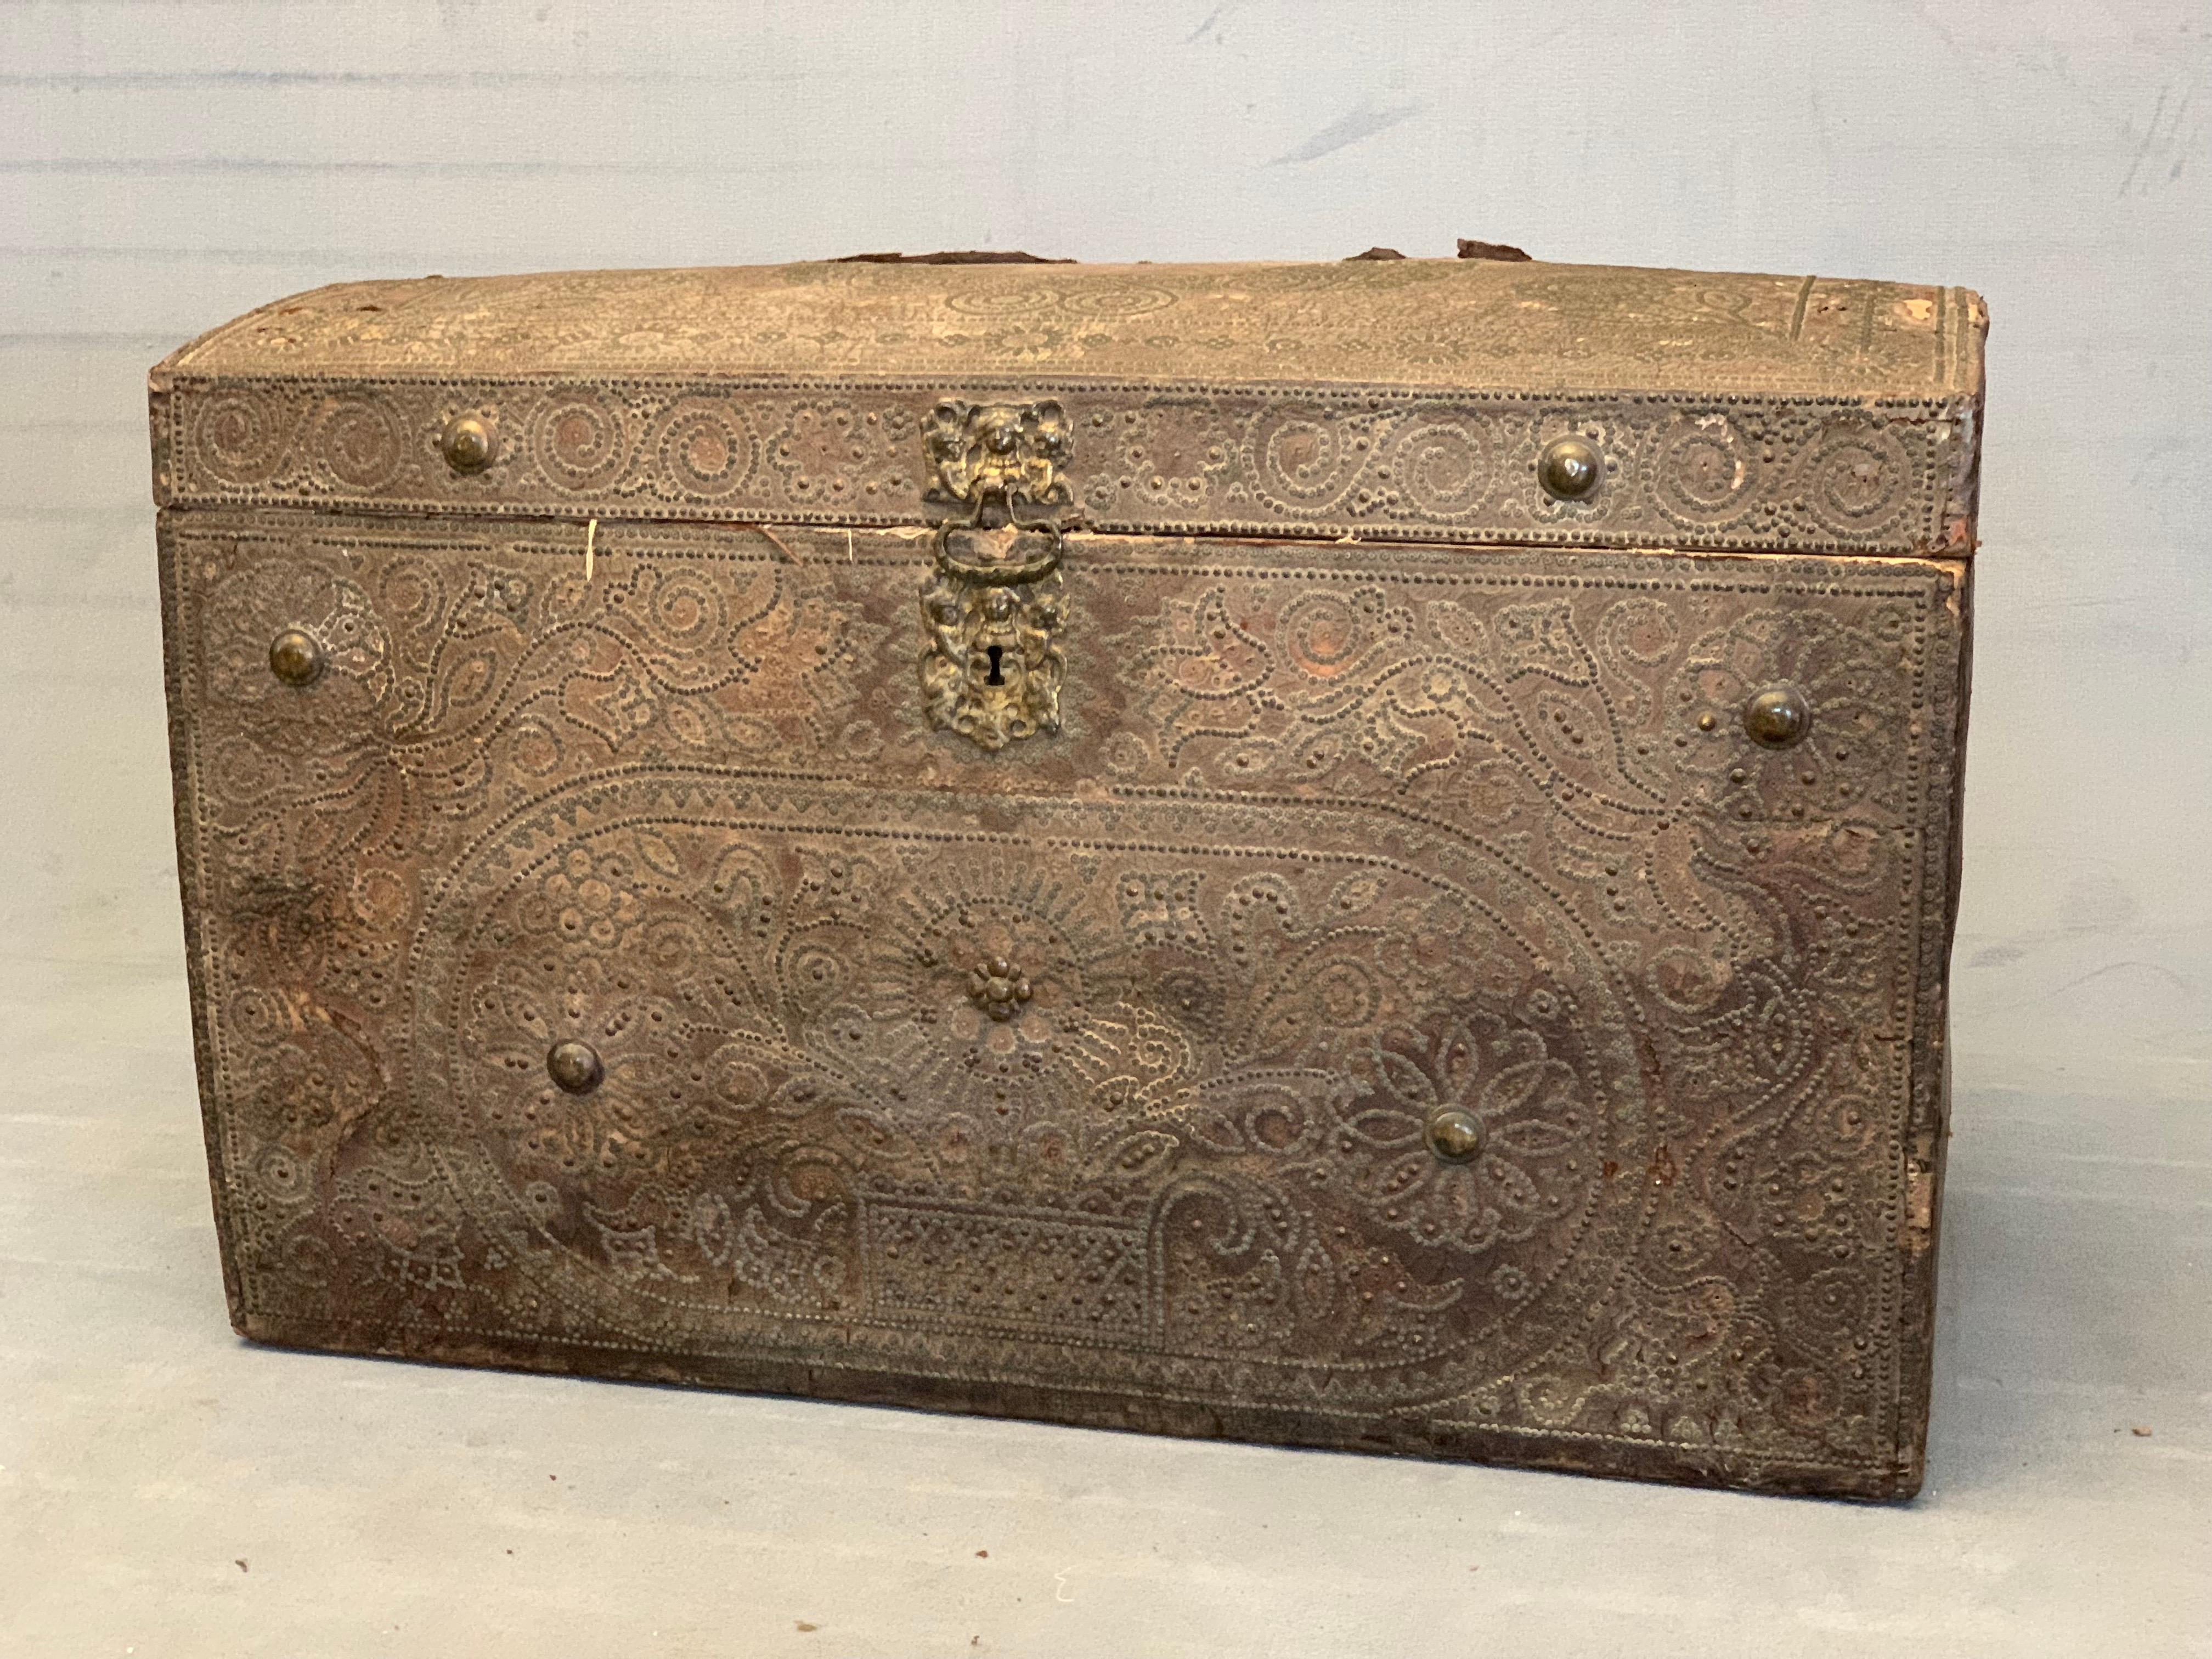 Antique colonial trunk in leather and oak of Spanish origin, circa 1720. The trunk has a central closure and a decoration with studs.